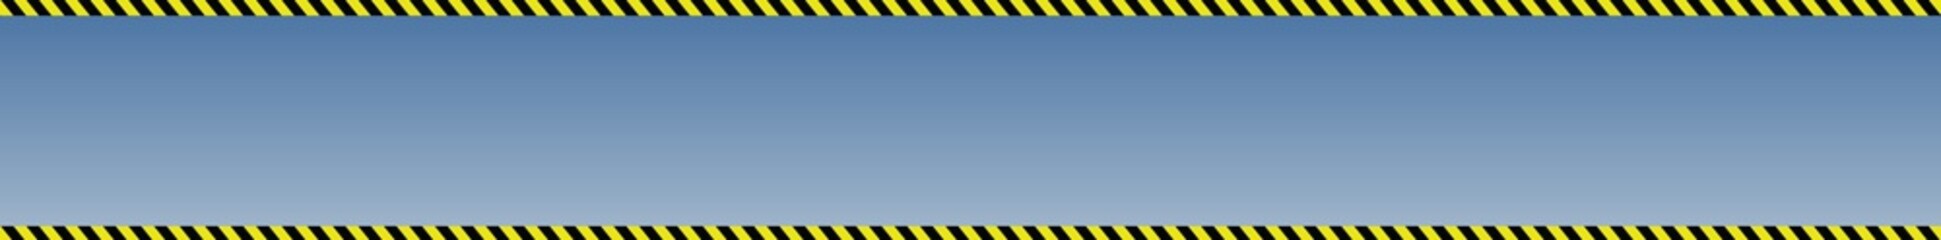 blue banner background with borders from building signal tape black and yellow